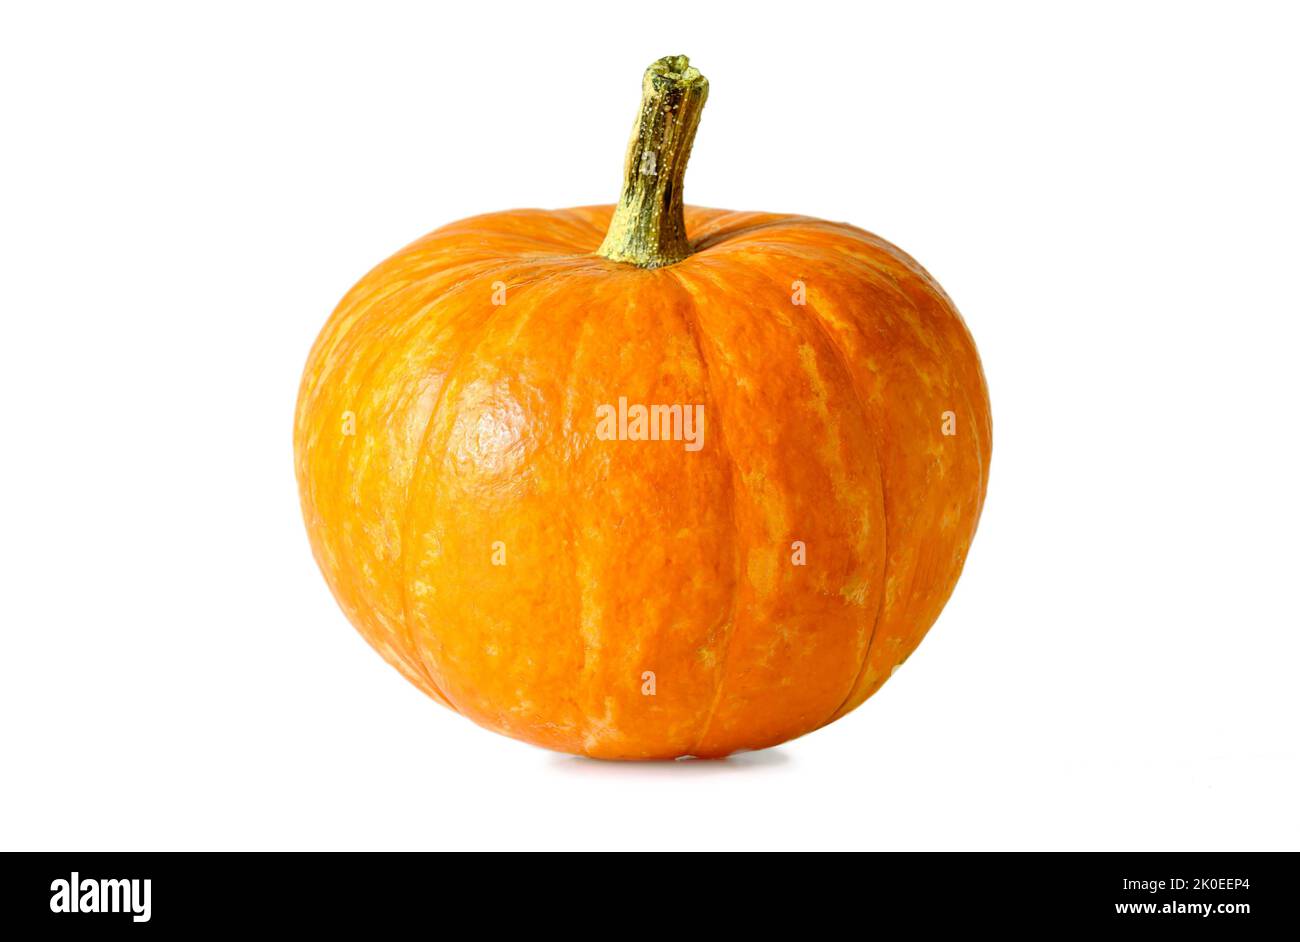 Pumpkin isolated on white background, one small squash, side view of fresh vegetable. Single yellow orange whole pumpkin on Halloween, Thanksgiving. D Stock Photo